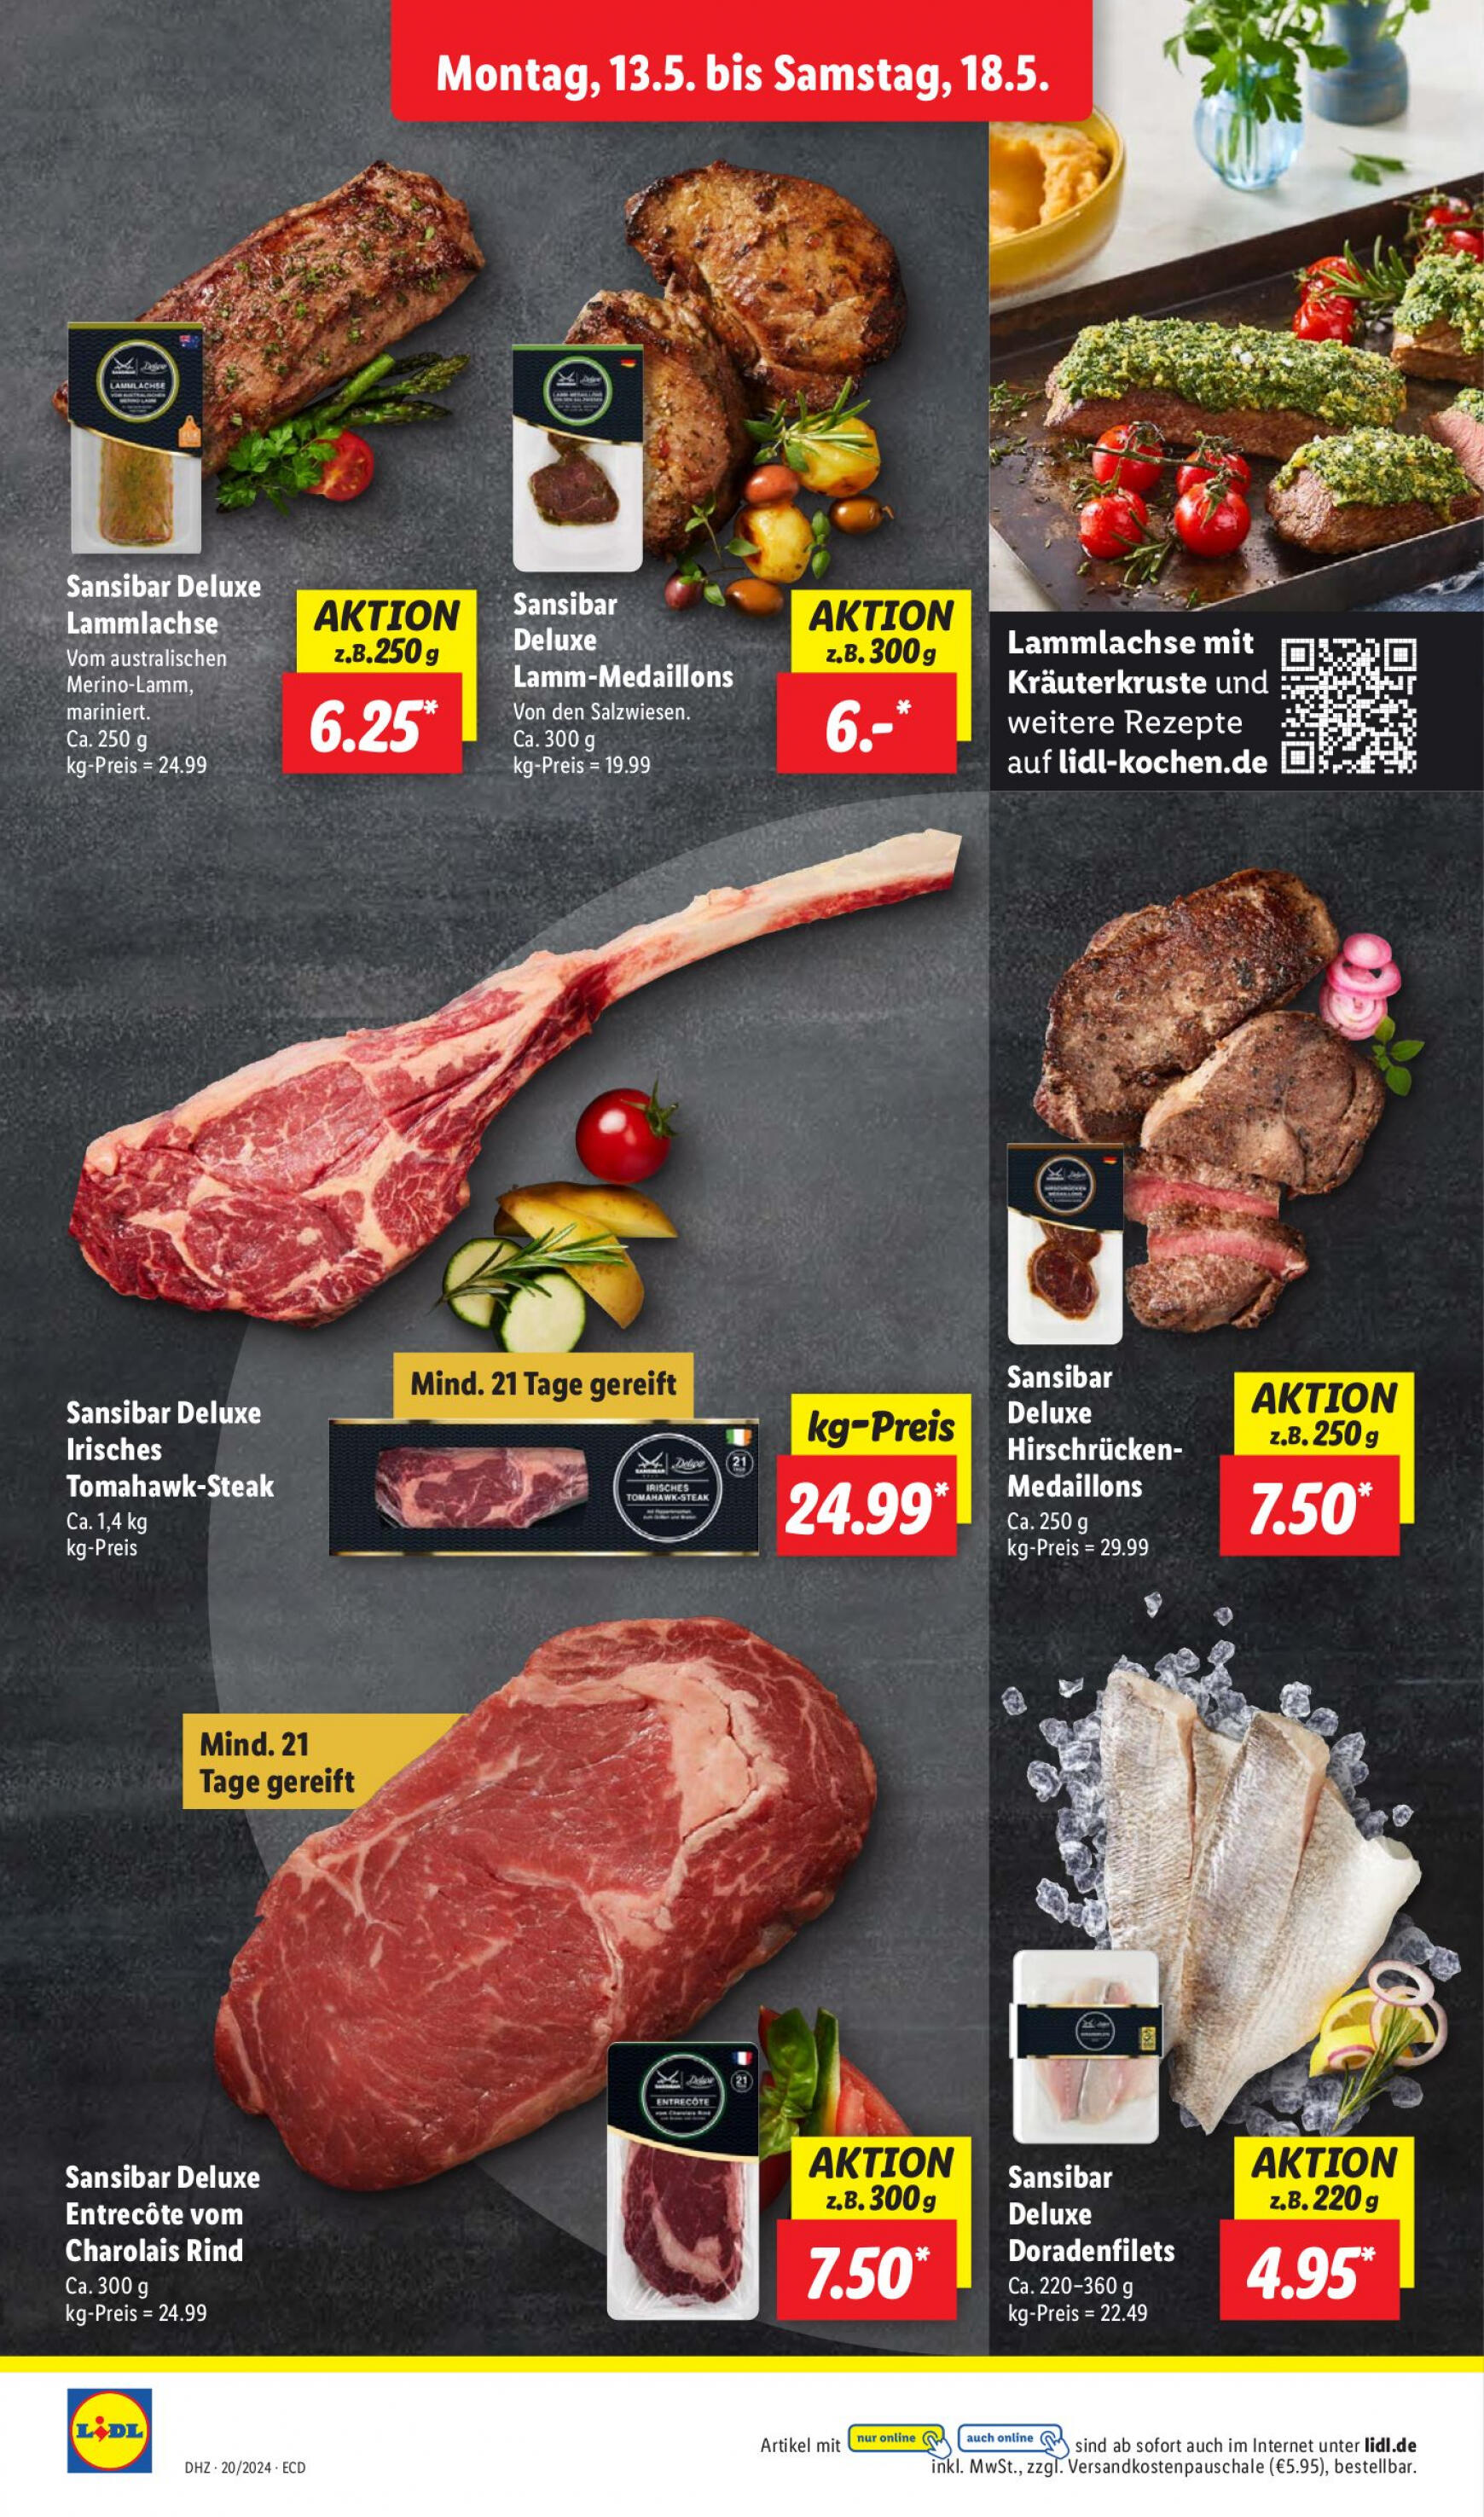 lidl - Flyer Lidl aktuell 13.05. - 18.05. - page: 6